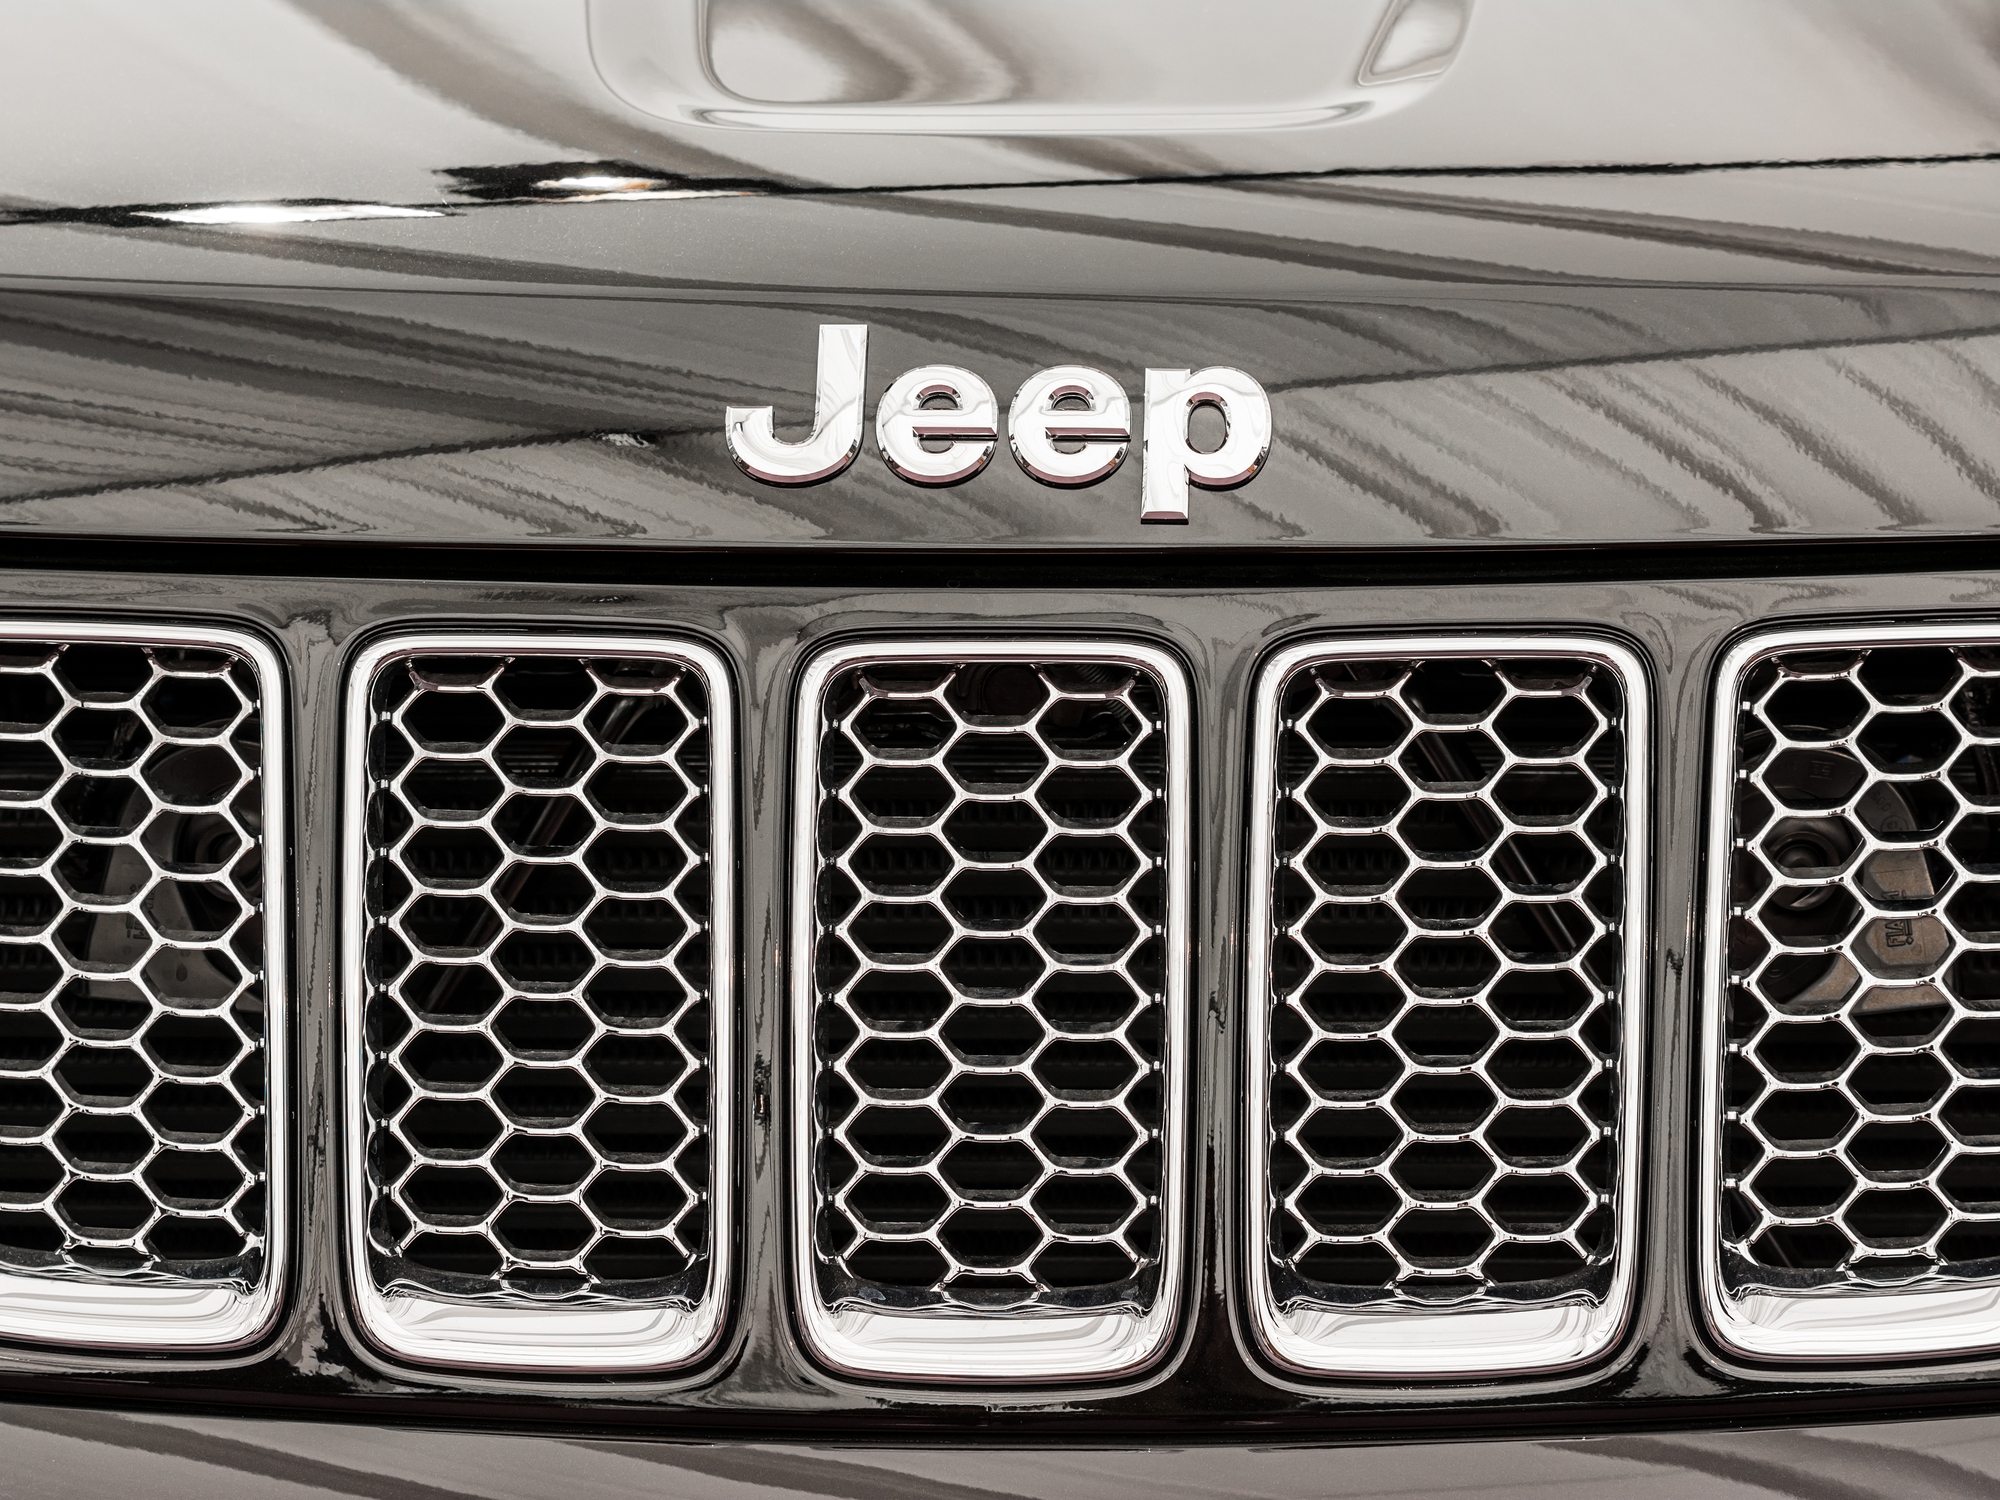 Jeep: An In-depth Look into the Past, Present, and Future of Jeep